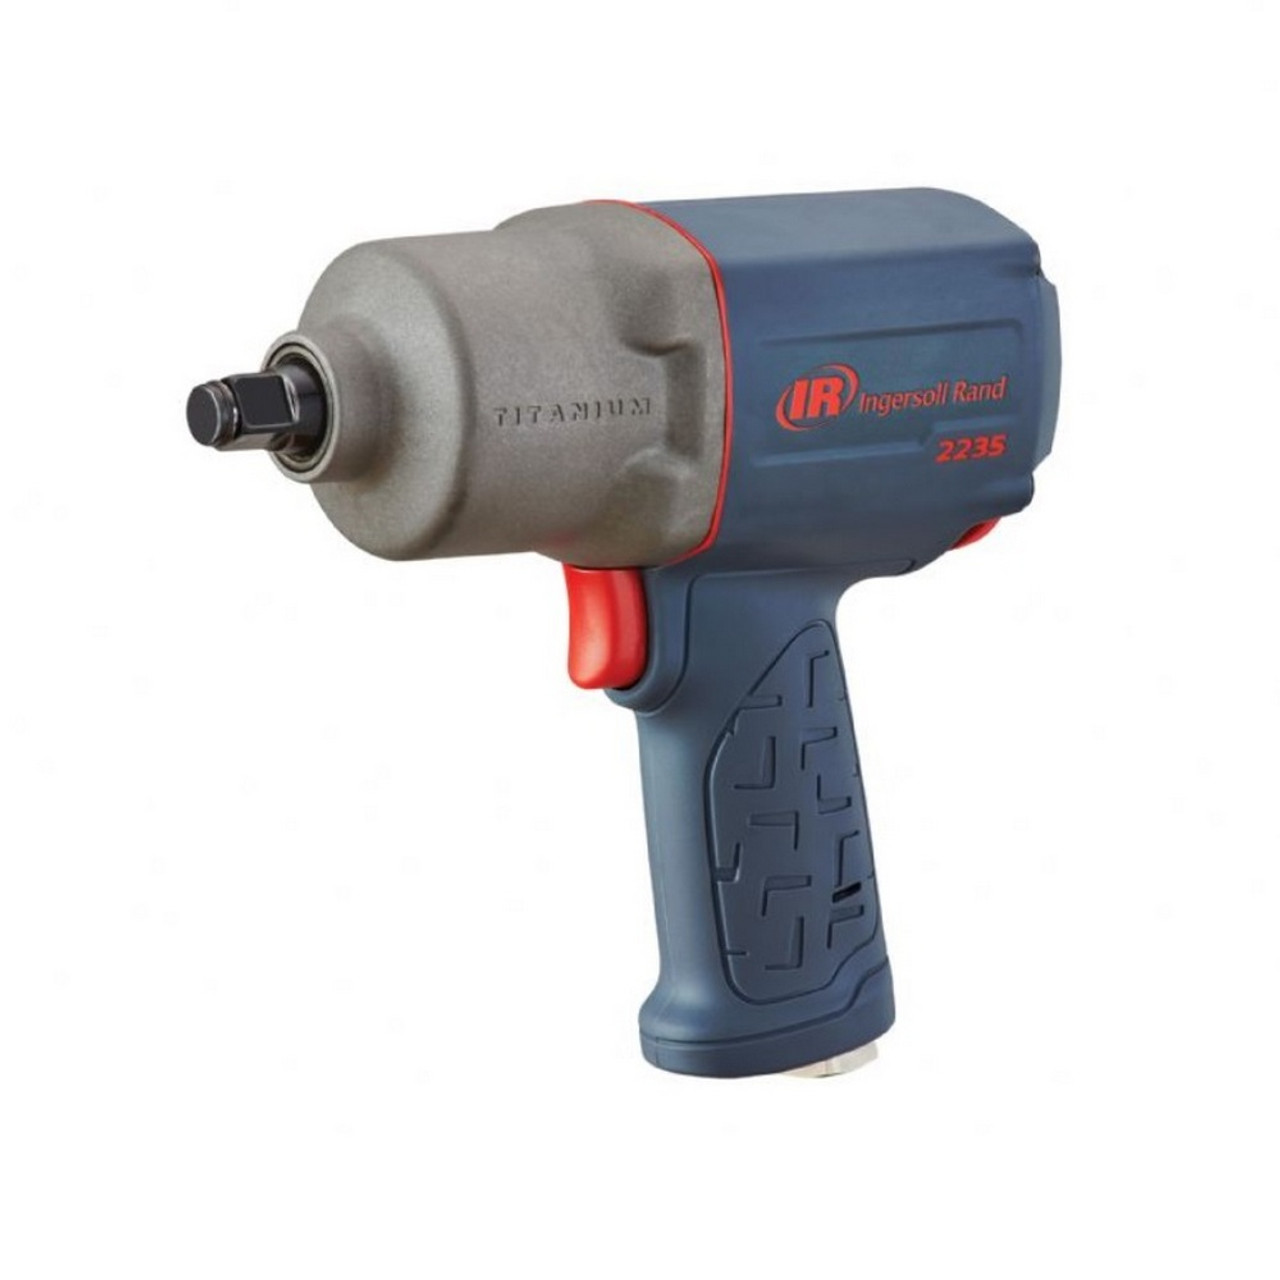 Ingersoll Rand 2235QTIMAX: 1/2" Impact Wrench